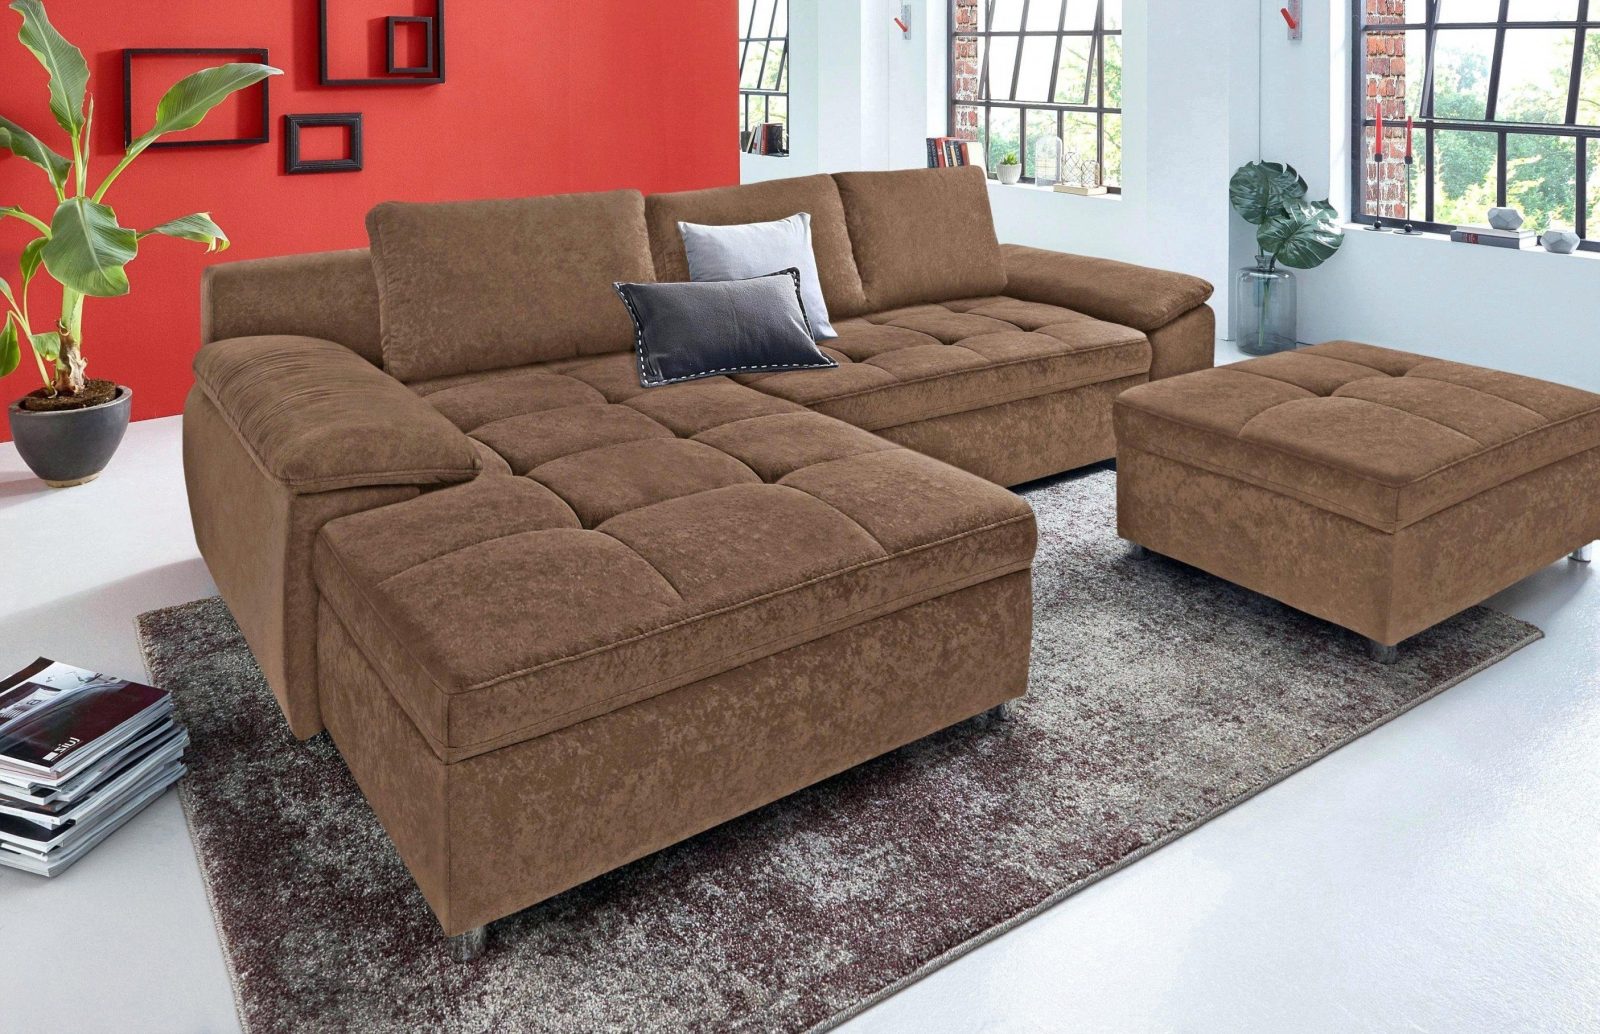 Sofa 3 Meter Breit Max Chesterfield 3 Sofa Couch 3 Meter Breit von Sofa 3 Meter Breit Bild